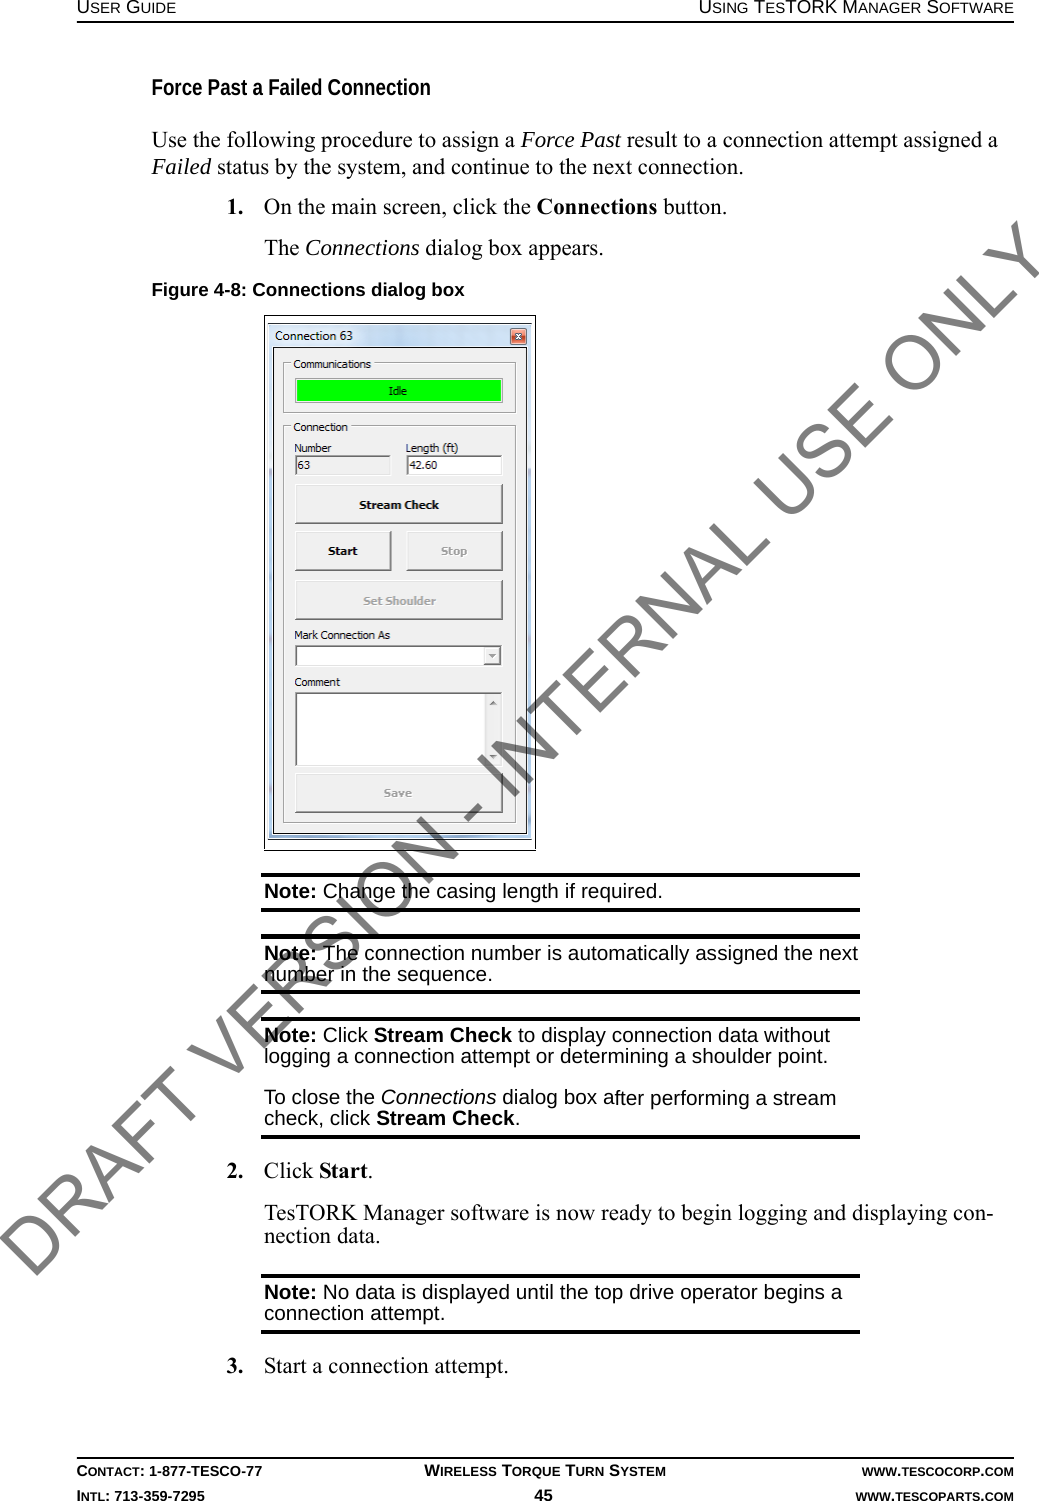 USER GUIDE USING TESTORK MANAGER SOFTWARECONTACT: 1-877-TESCO-77 WIRELESS TORQUE TURN SYSTEM WWW.TESCOCORP.COMINTL: 713-359-7295 45    WWW.TESCOPARTS.COMForce Past a Failed ConnectionUse the following procedure to assign a Force Past result to a connection attempt assigned a Failed status by the system, and continue to the next connection.1. On the main screen, click the Connections button.The Connections dialog box appears.Note: Change the casing length if required.Note: The connection number is automatically assigned the next number in the sequence.Note: Click Stream Check to display connection data without logging a connection attempt or determining a shoulder point.To close the Connections dialog box after performing a stream check, click Stream Check.2. Click Start.TesTORK Manager software is now ready to begin logging and displaying con-nection data.Note: No data is displayed until the top drive operator begins a connection attempt. 3. Start a connection attempt.Figure 4-8: Connections dialog boxDRAFT VERSION - INTERNAL USE ONLY